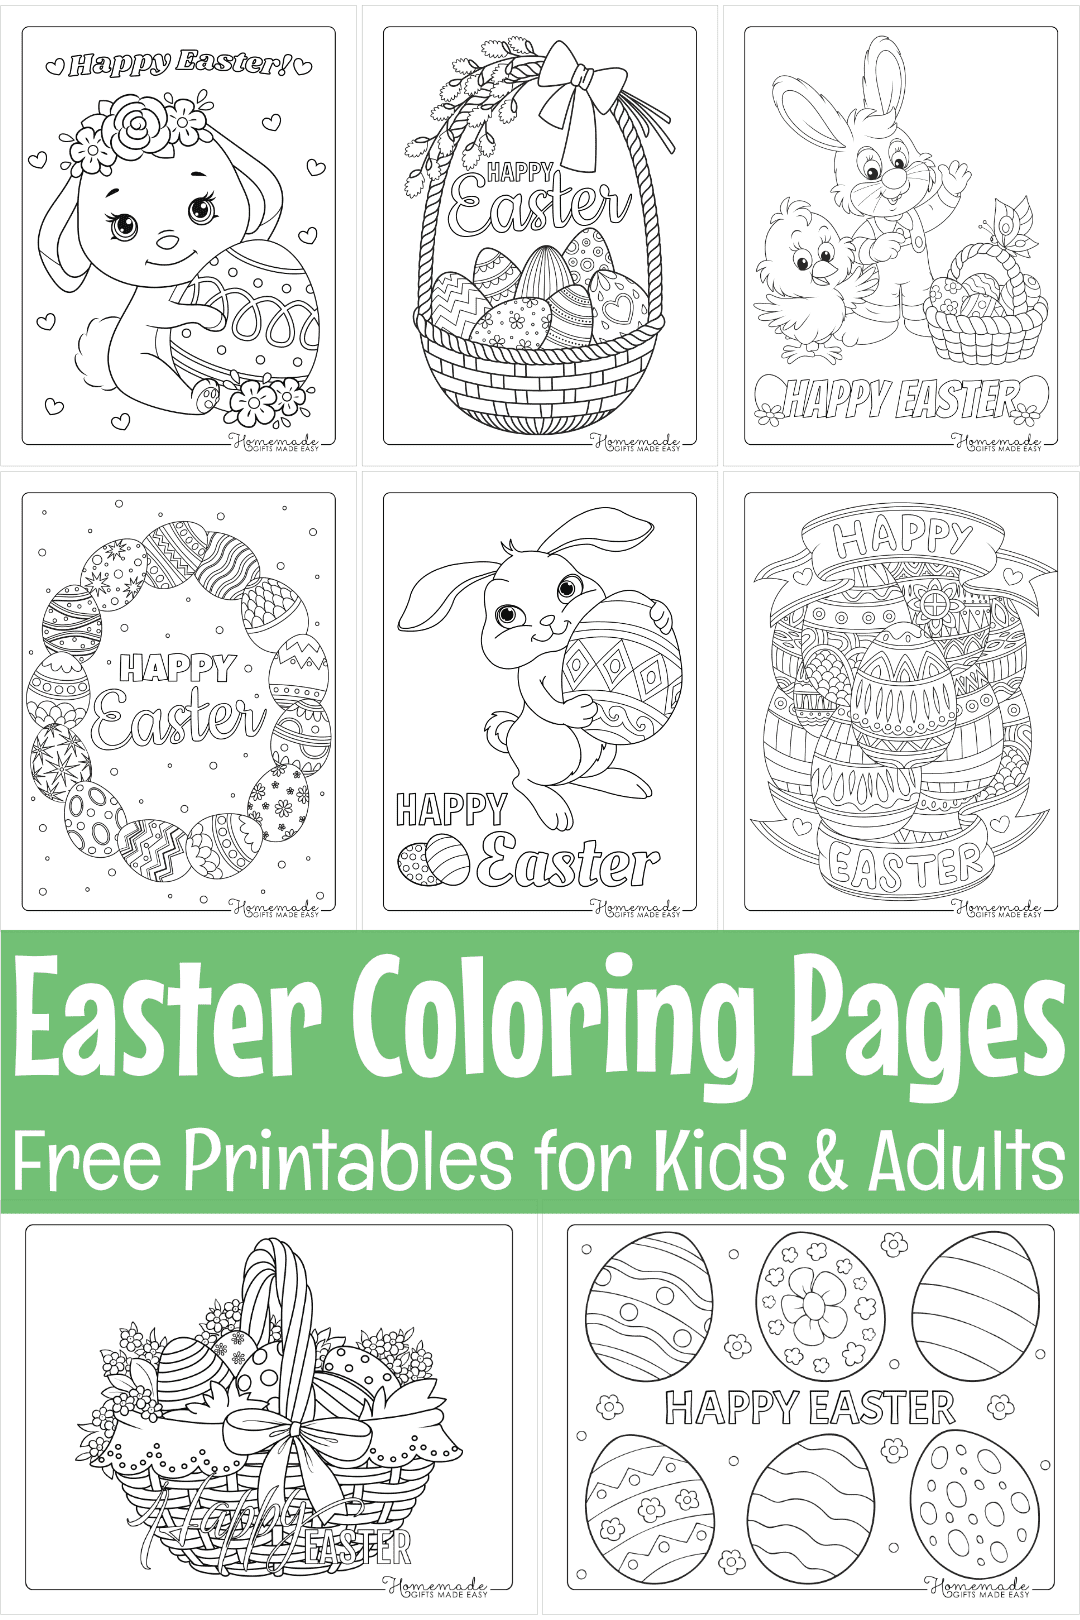 Free printable Easter coloring pages